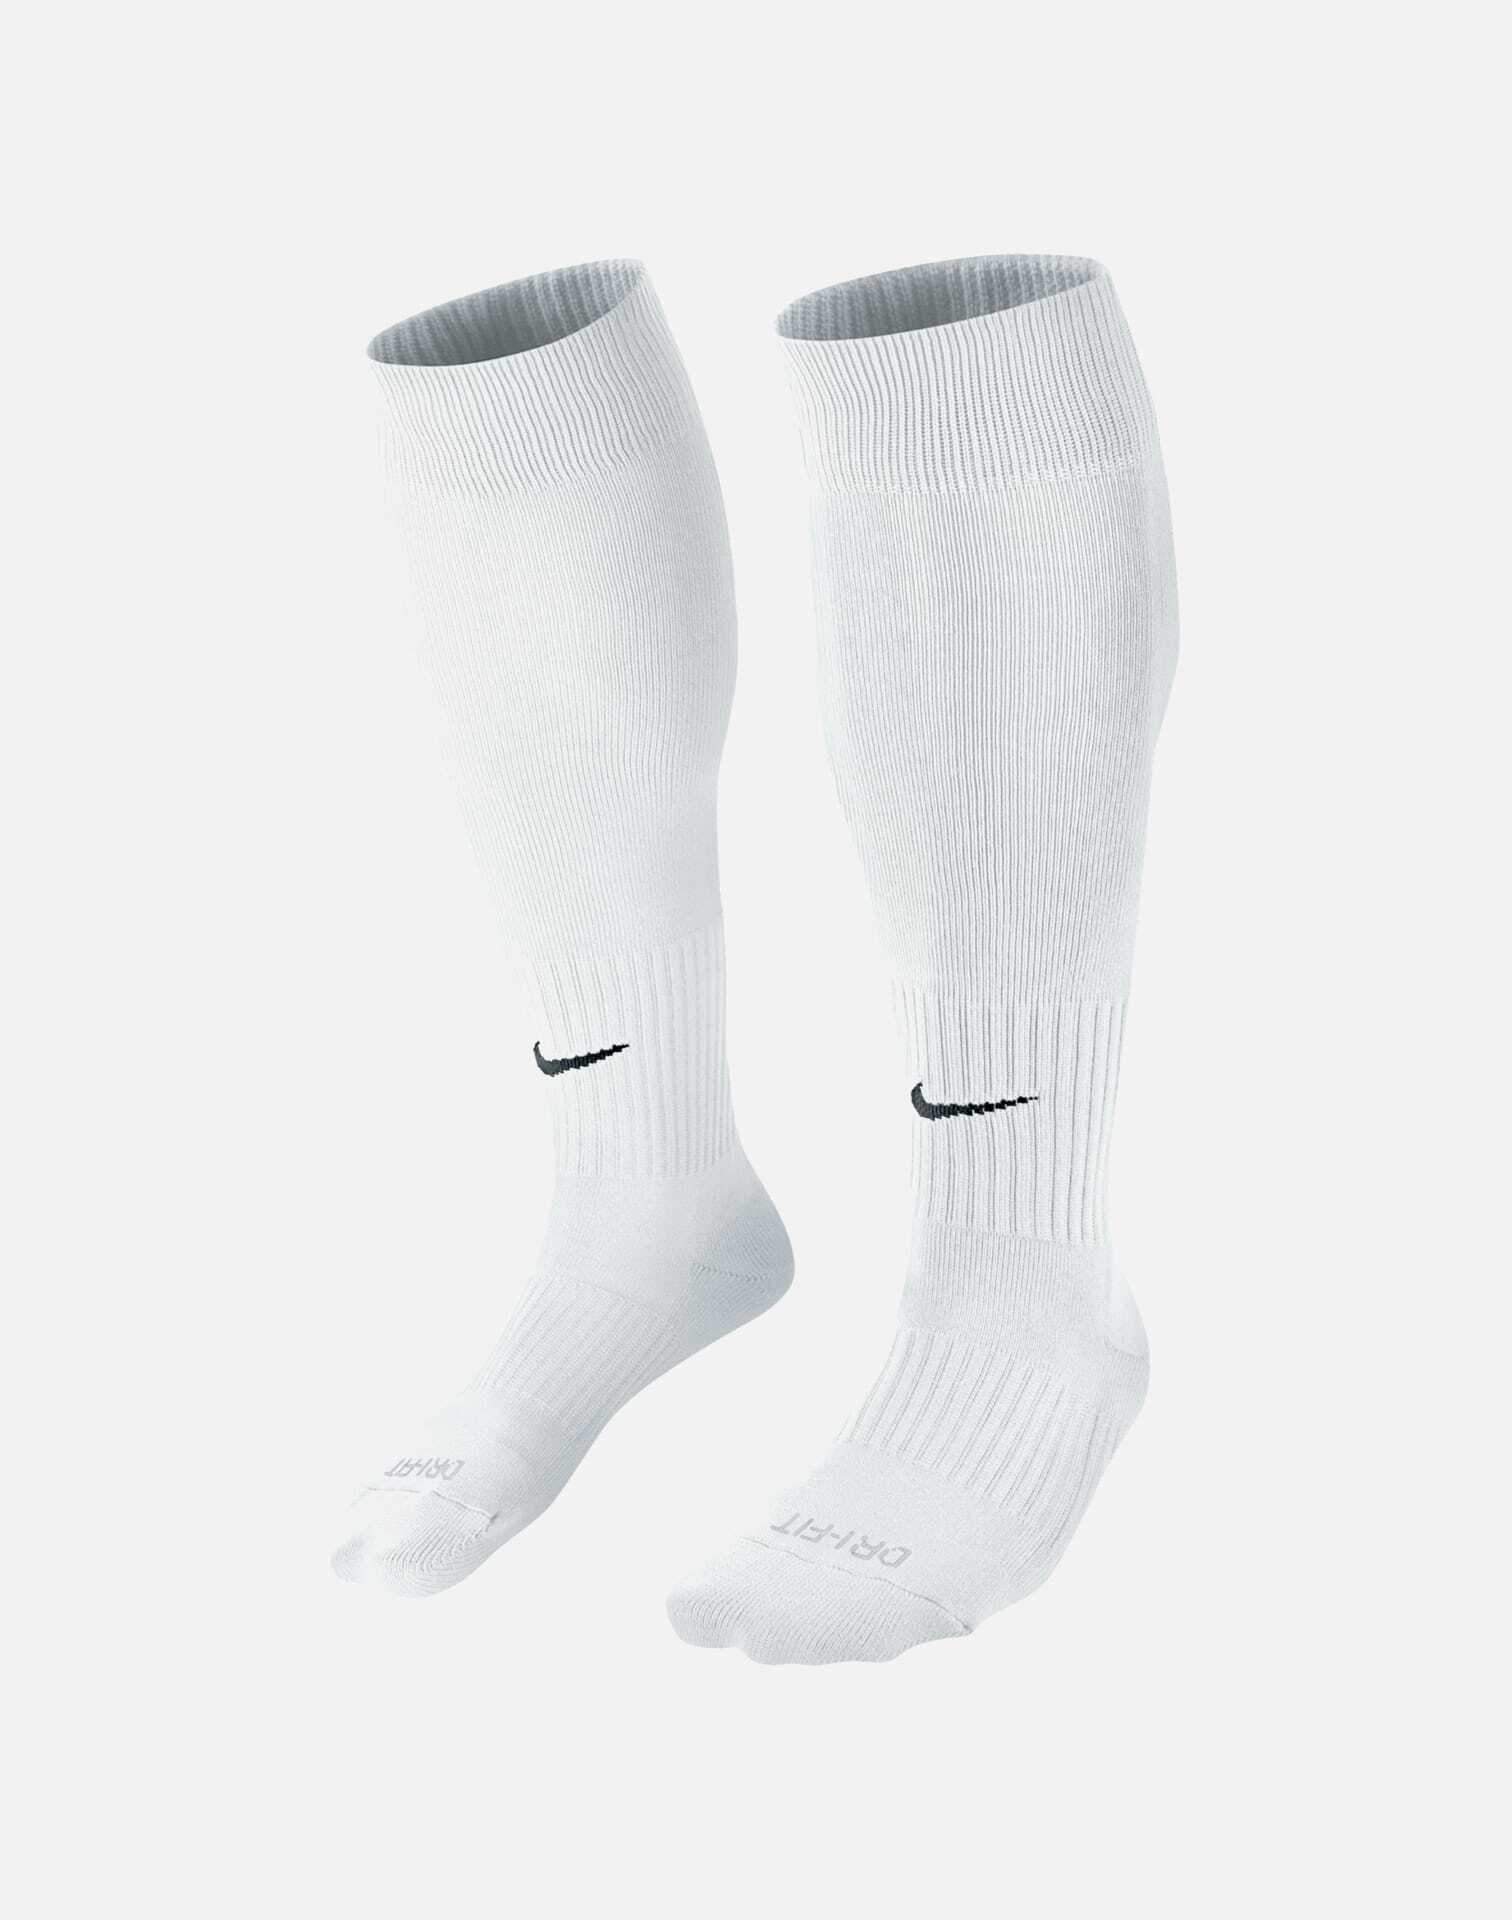 CLASSIC 2 OVER-THE-CALF SOCKS – DTLR